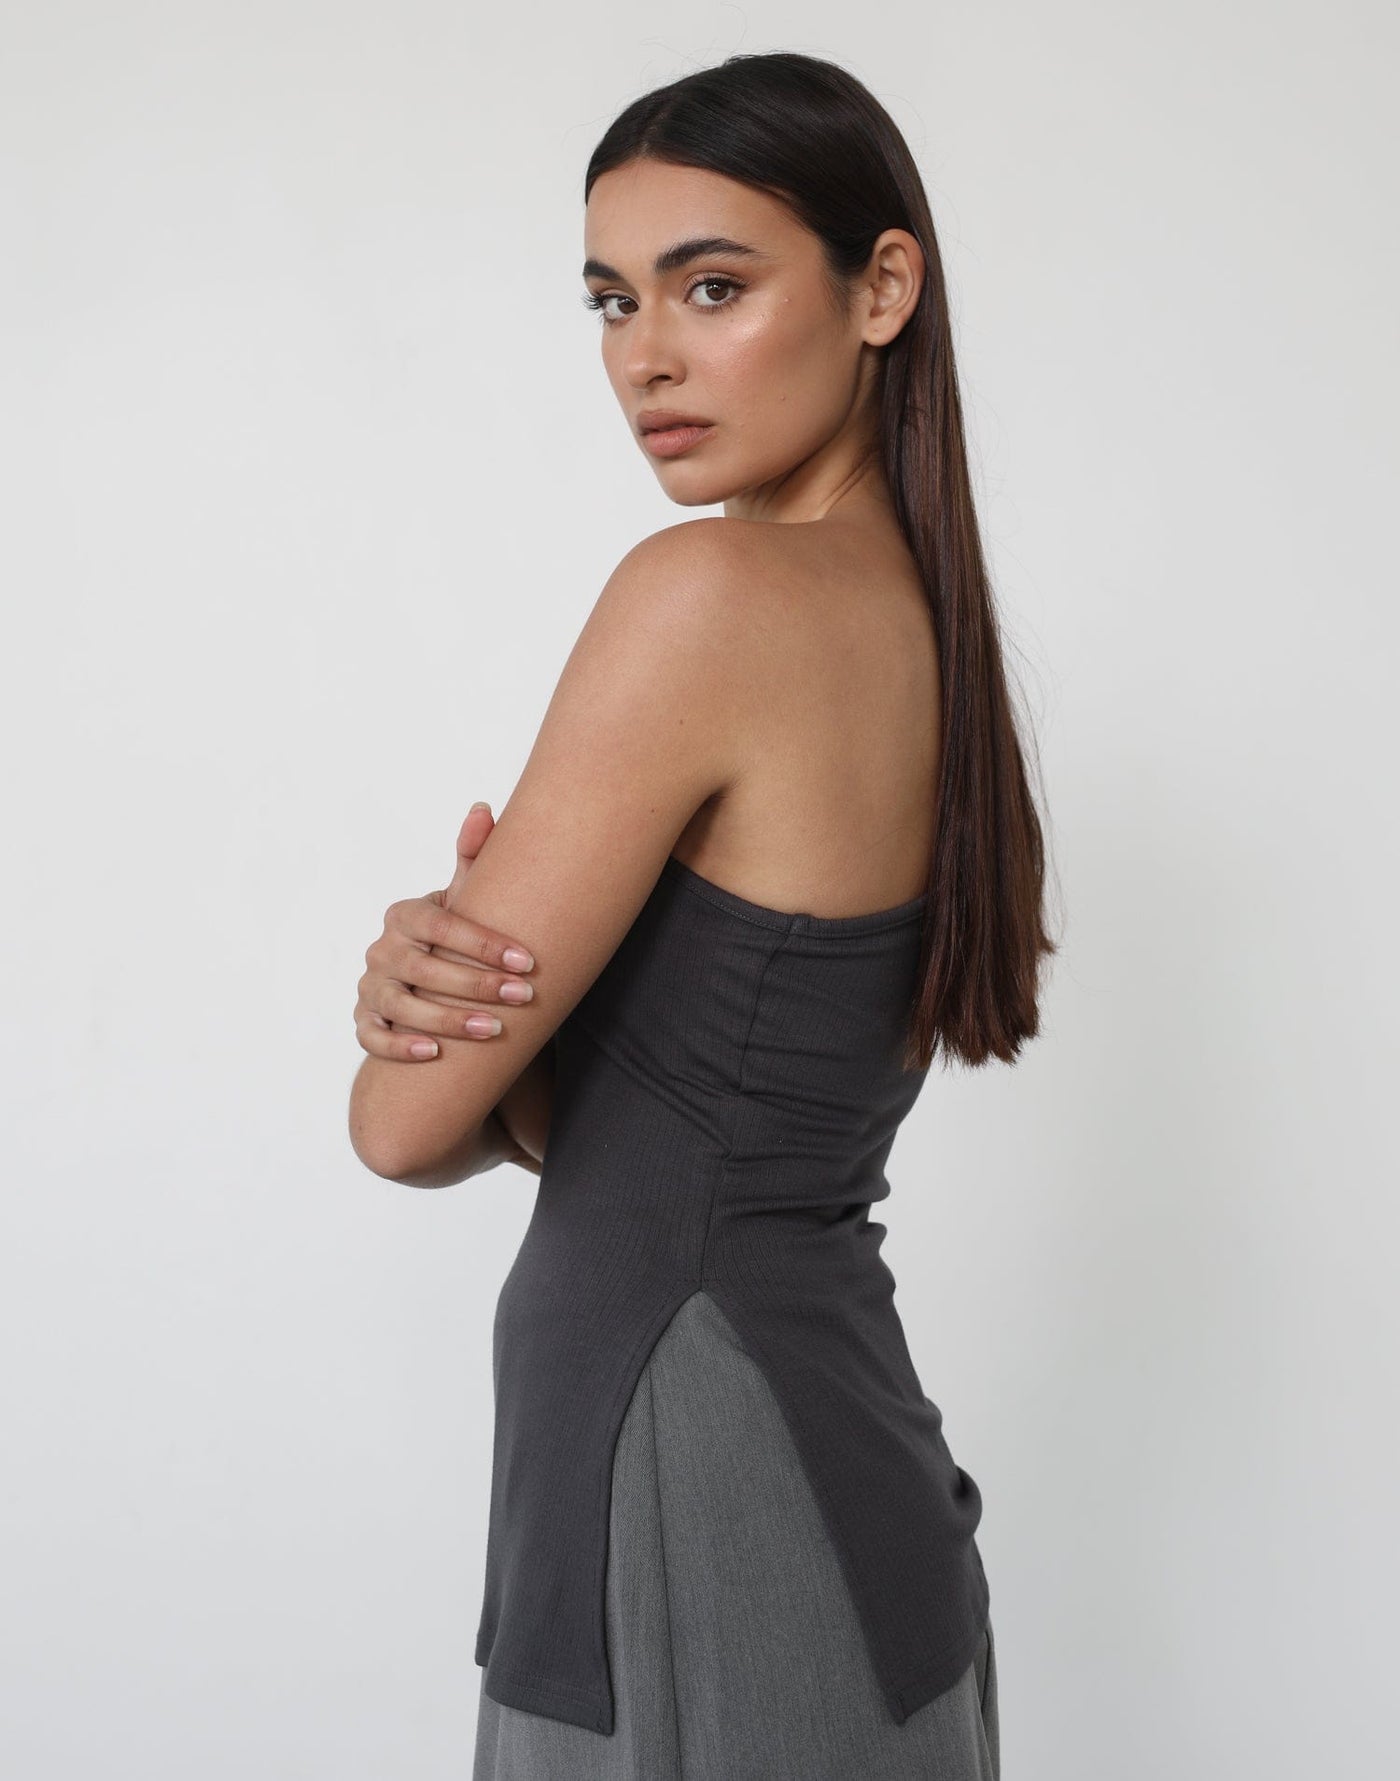 Allison Top (Charcoal) - One Shoulder Charcoal Grey Top - Women's Tops - Charcoal Clothing